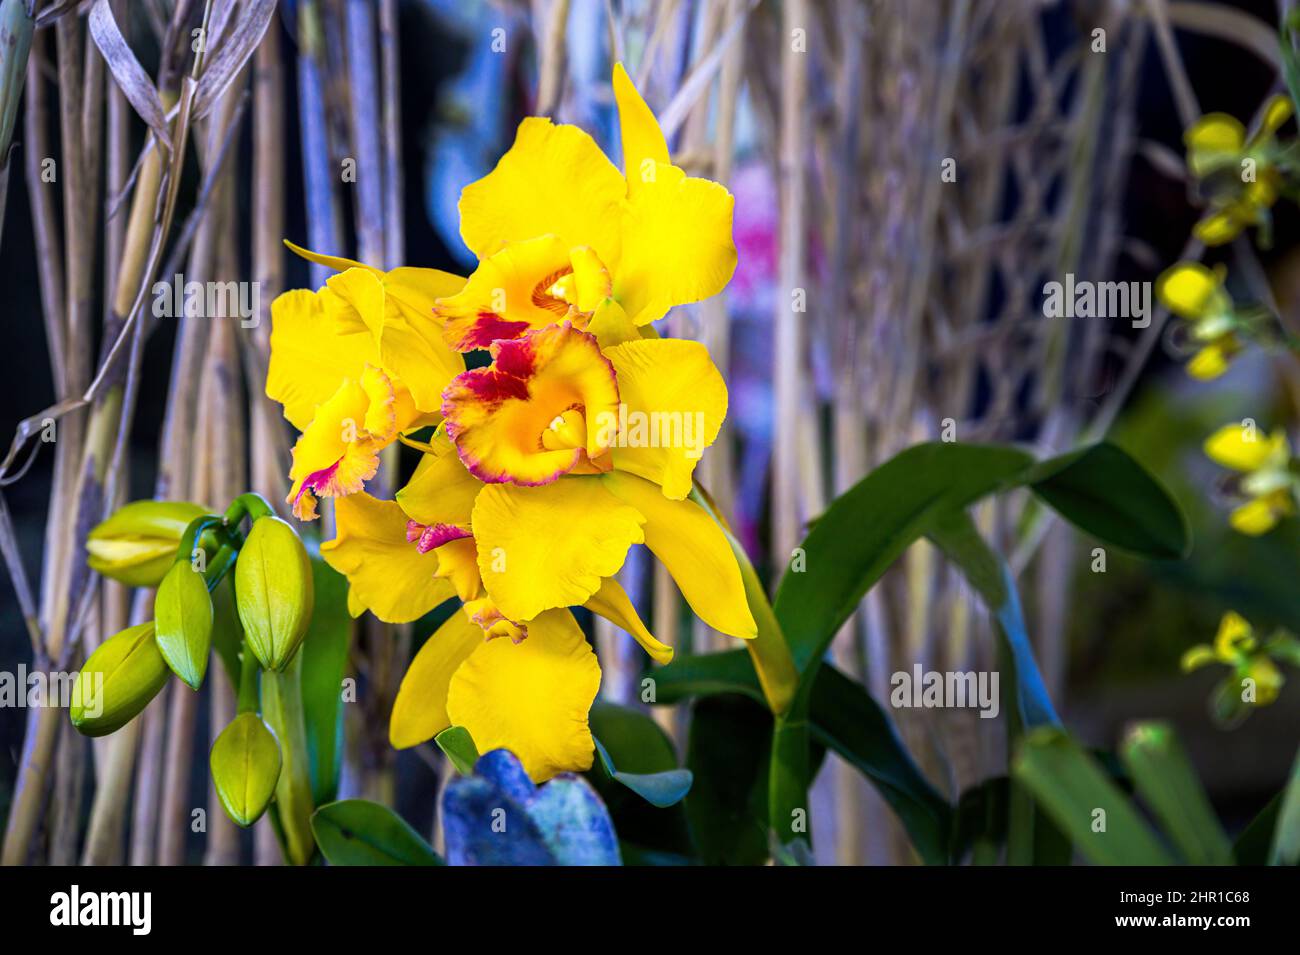 Yellow and red flowers of the orchid Brassolaeliocattleya Village Chief Headache Stock Photo